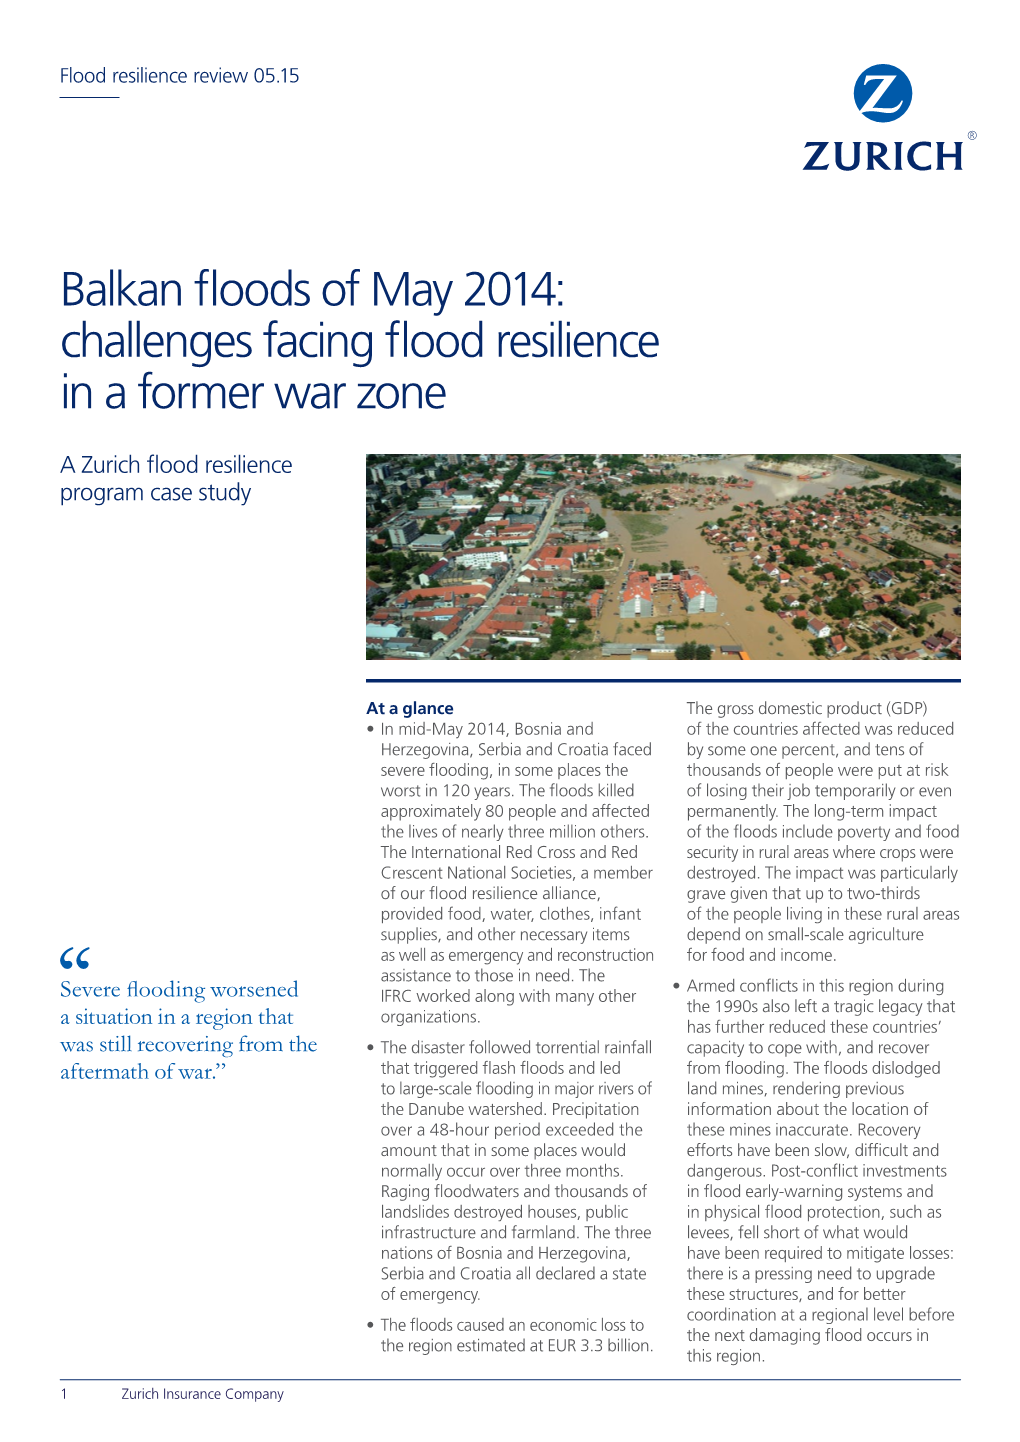 Balkan Floods of May 2014: Challenges Facing Flood Resilience in a Former War Zone